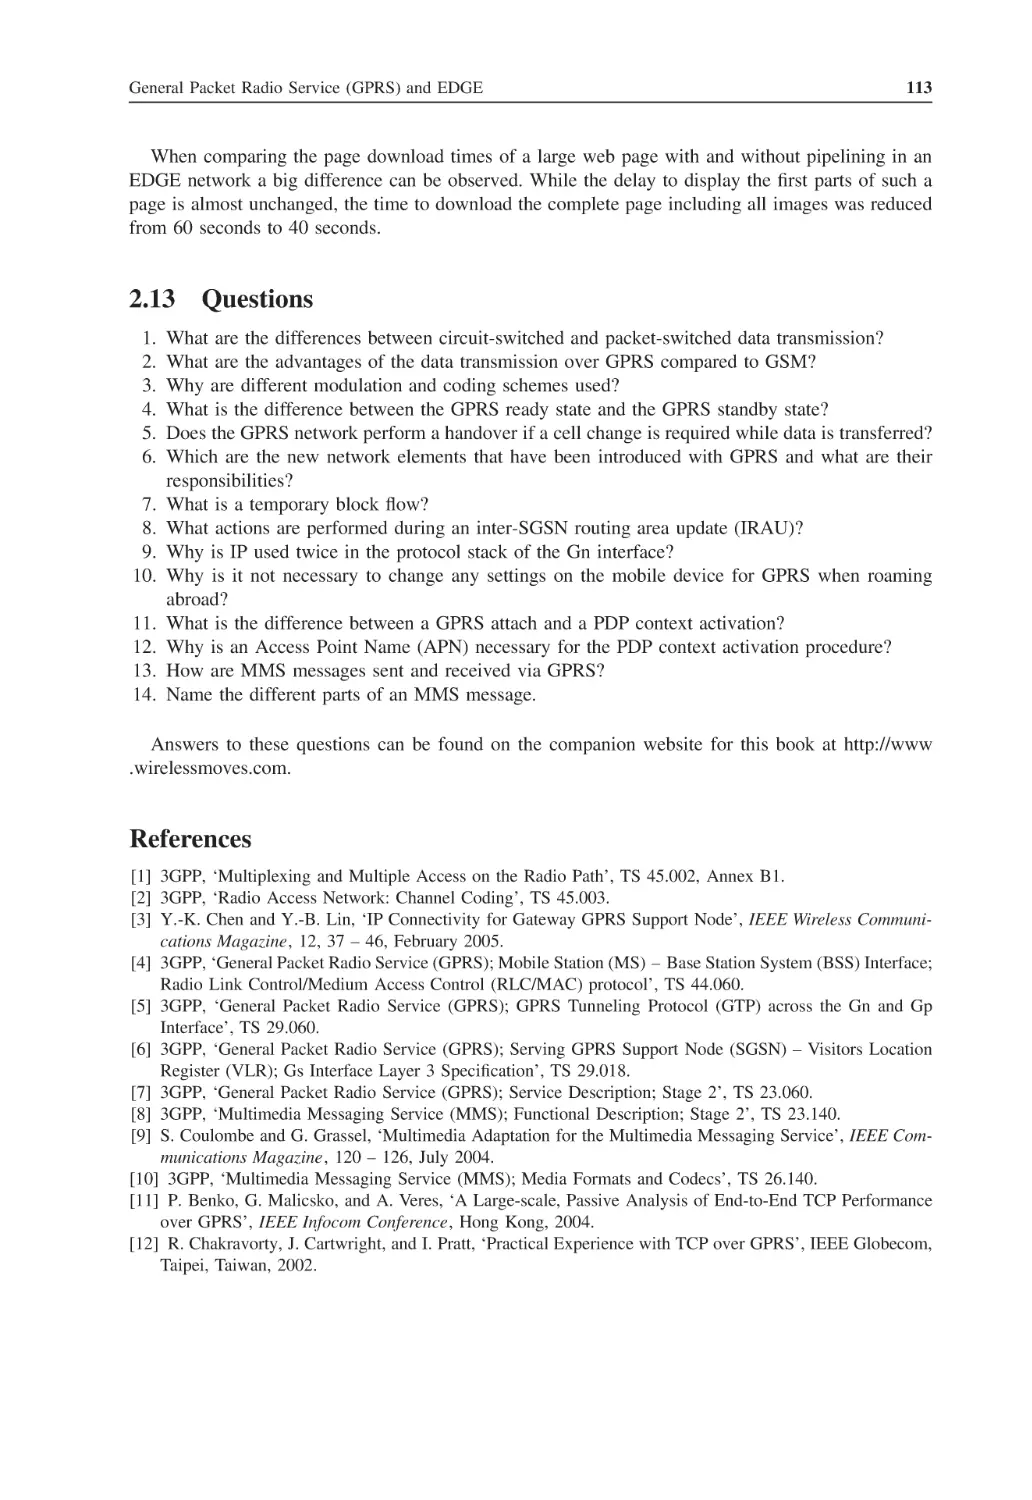 2.13 Questions
References